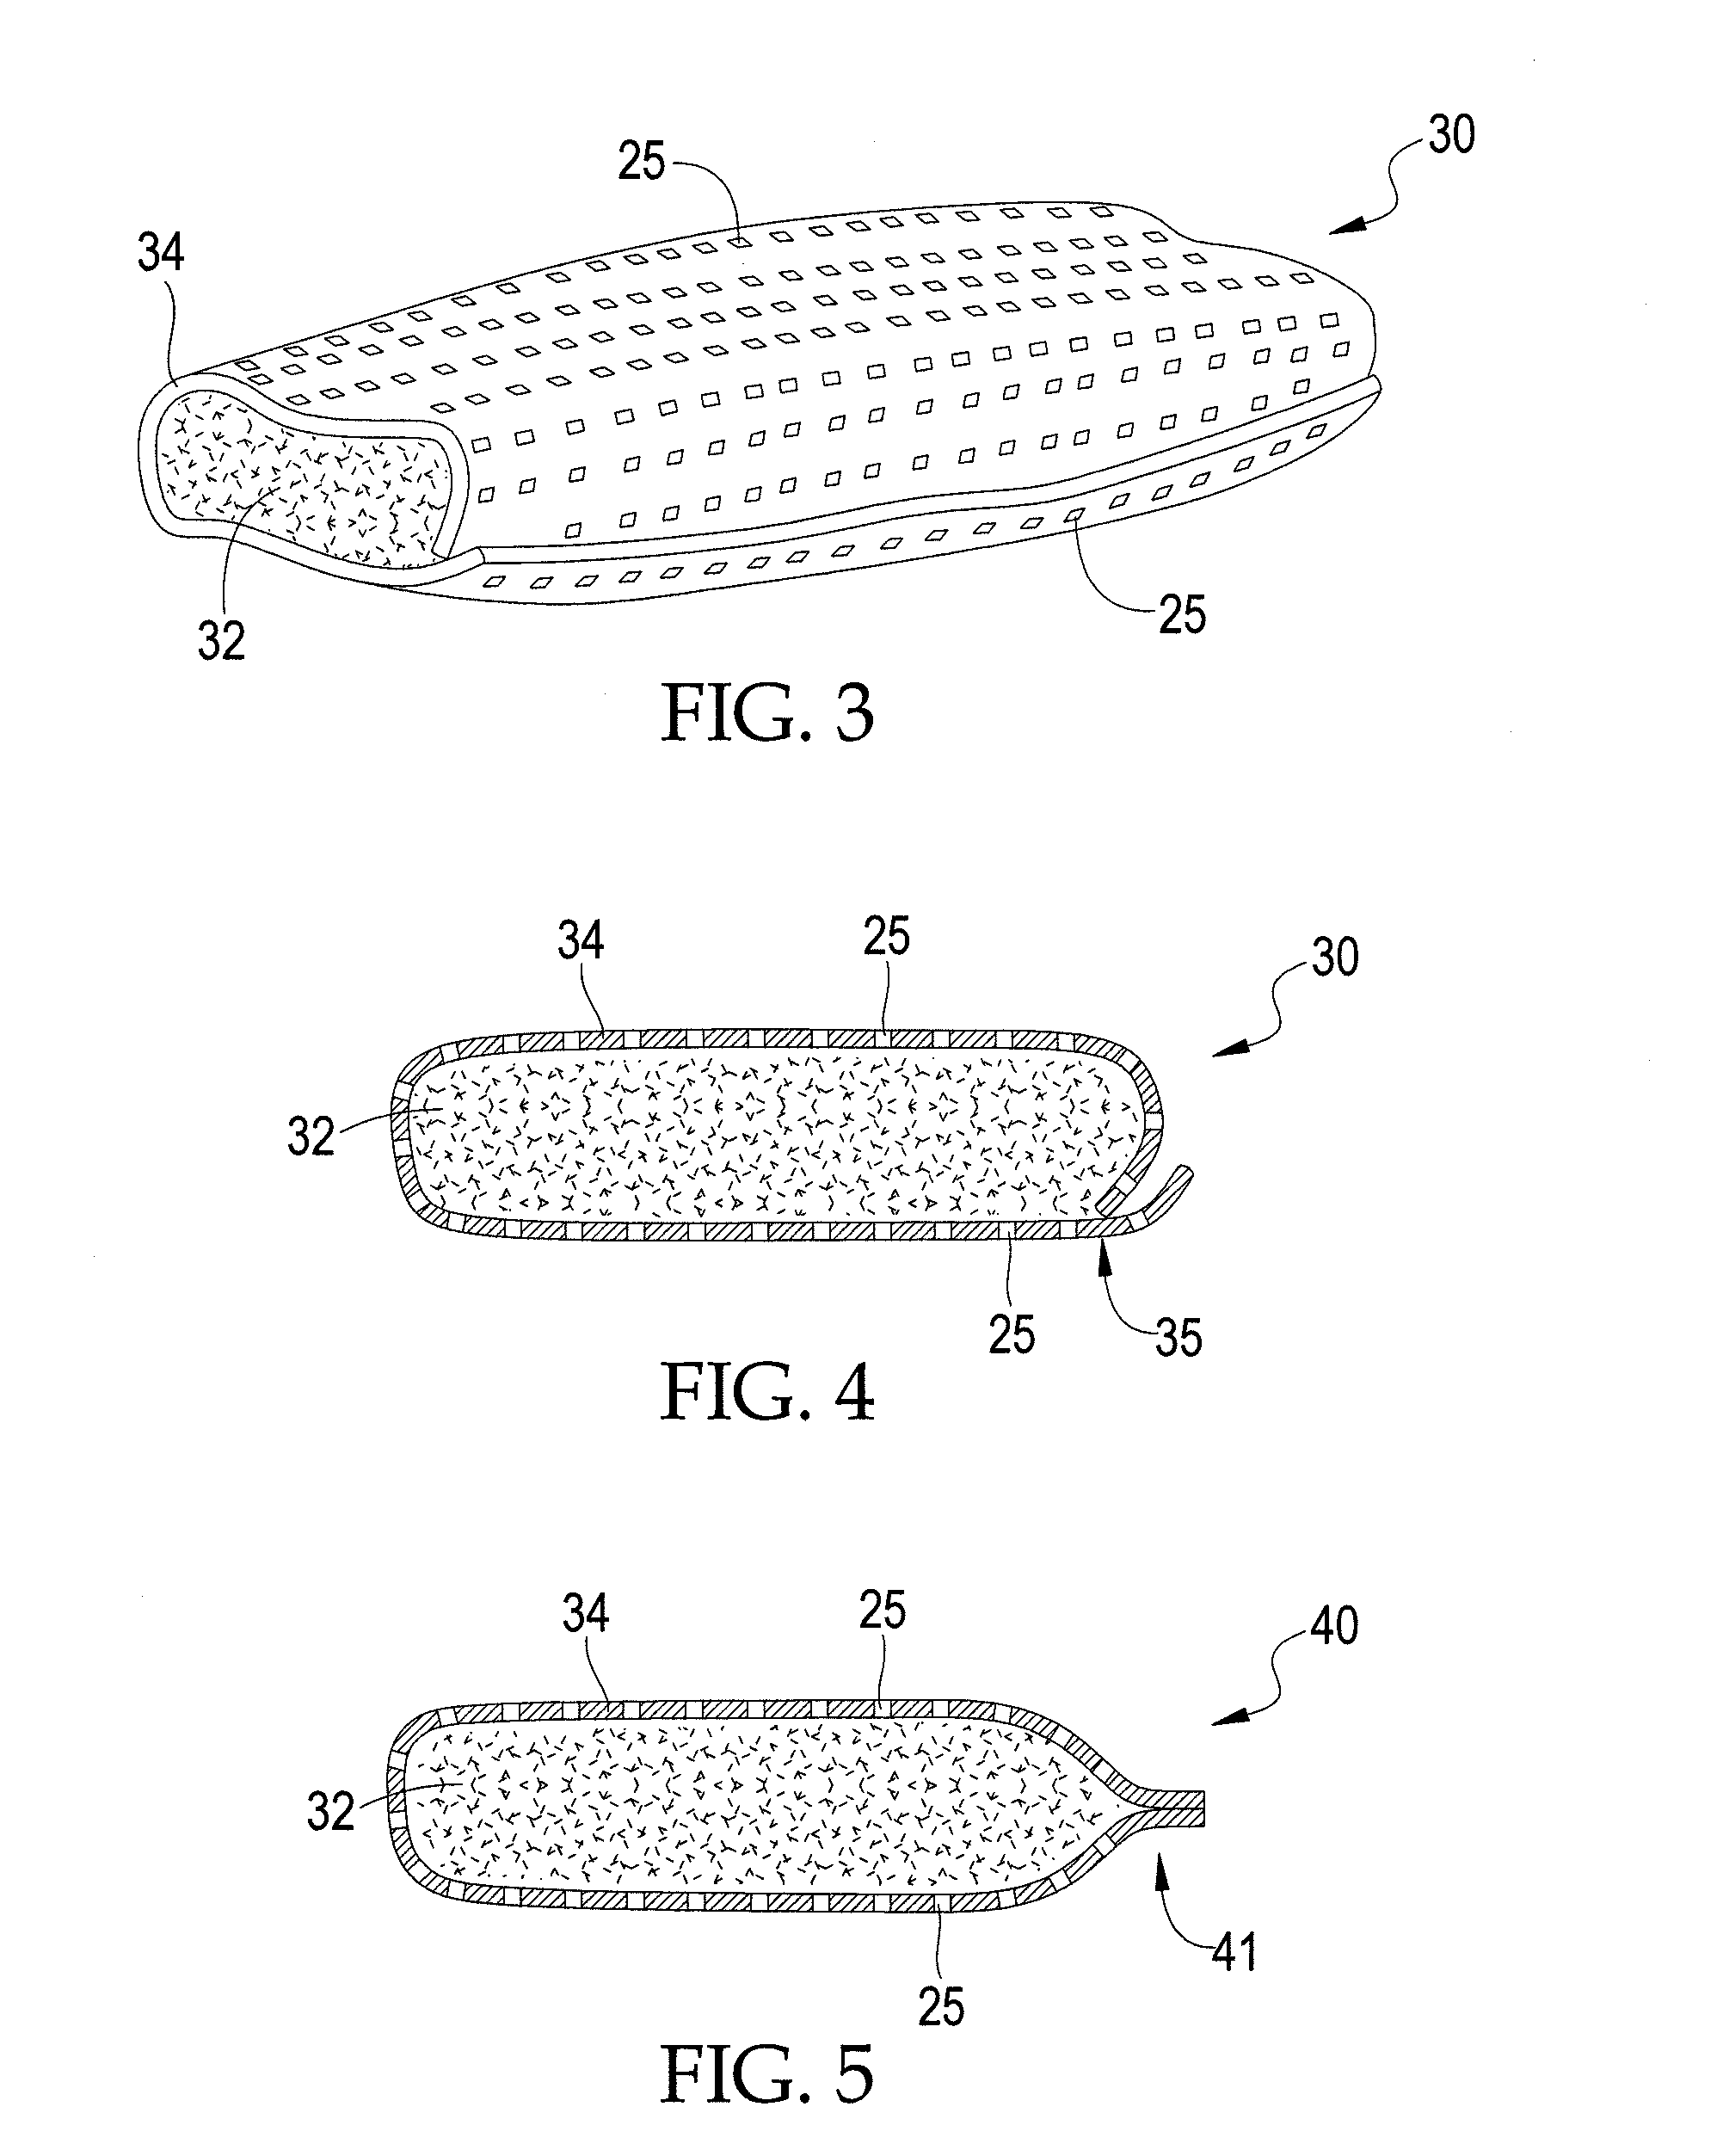 Osteoconductive Implants and Methods of Using Same